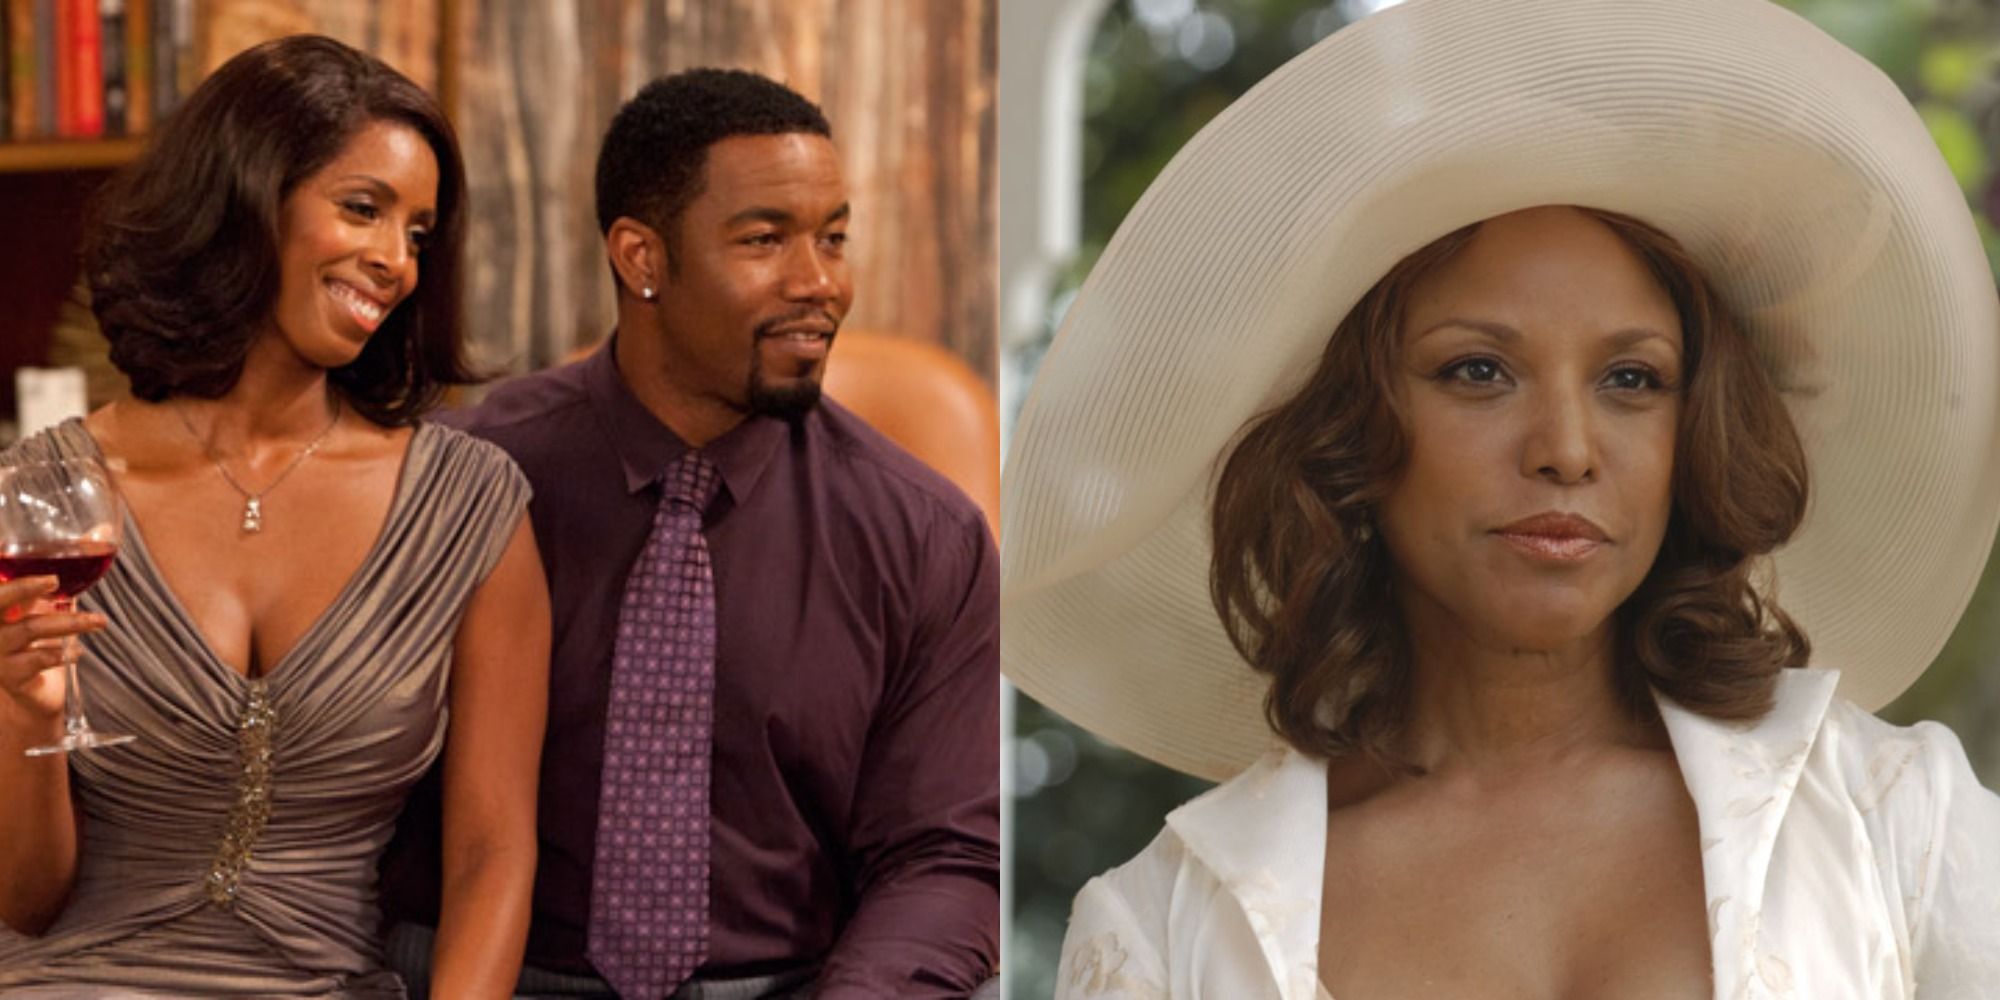 Split image showing characters from the Madea movies.